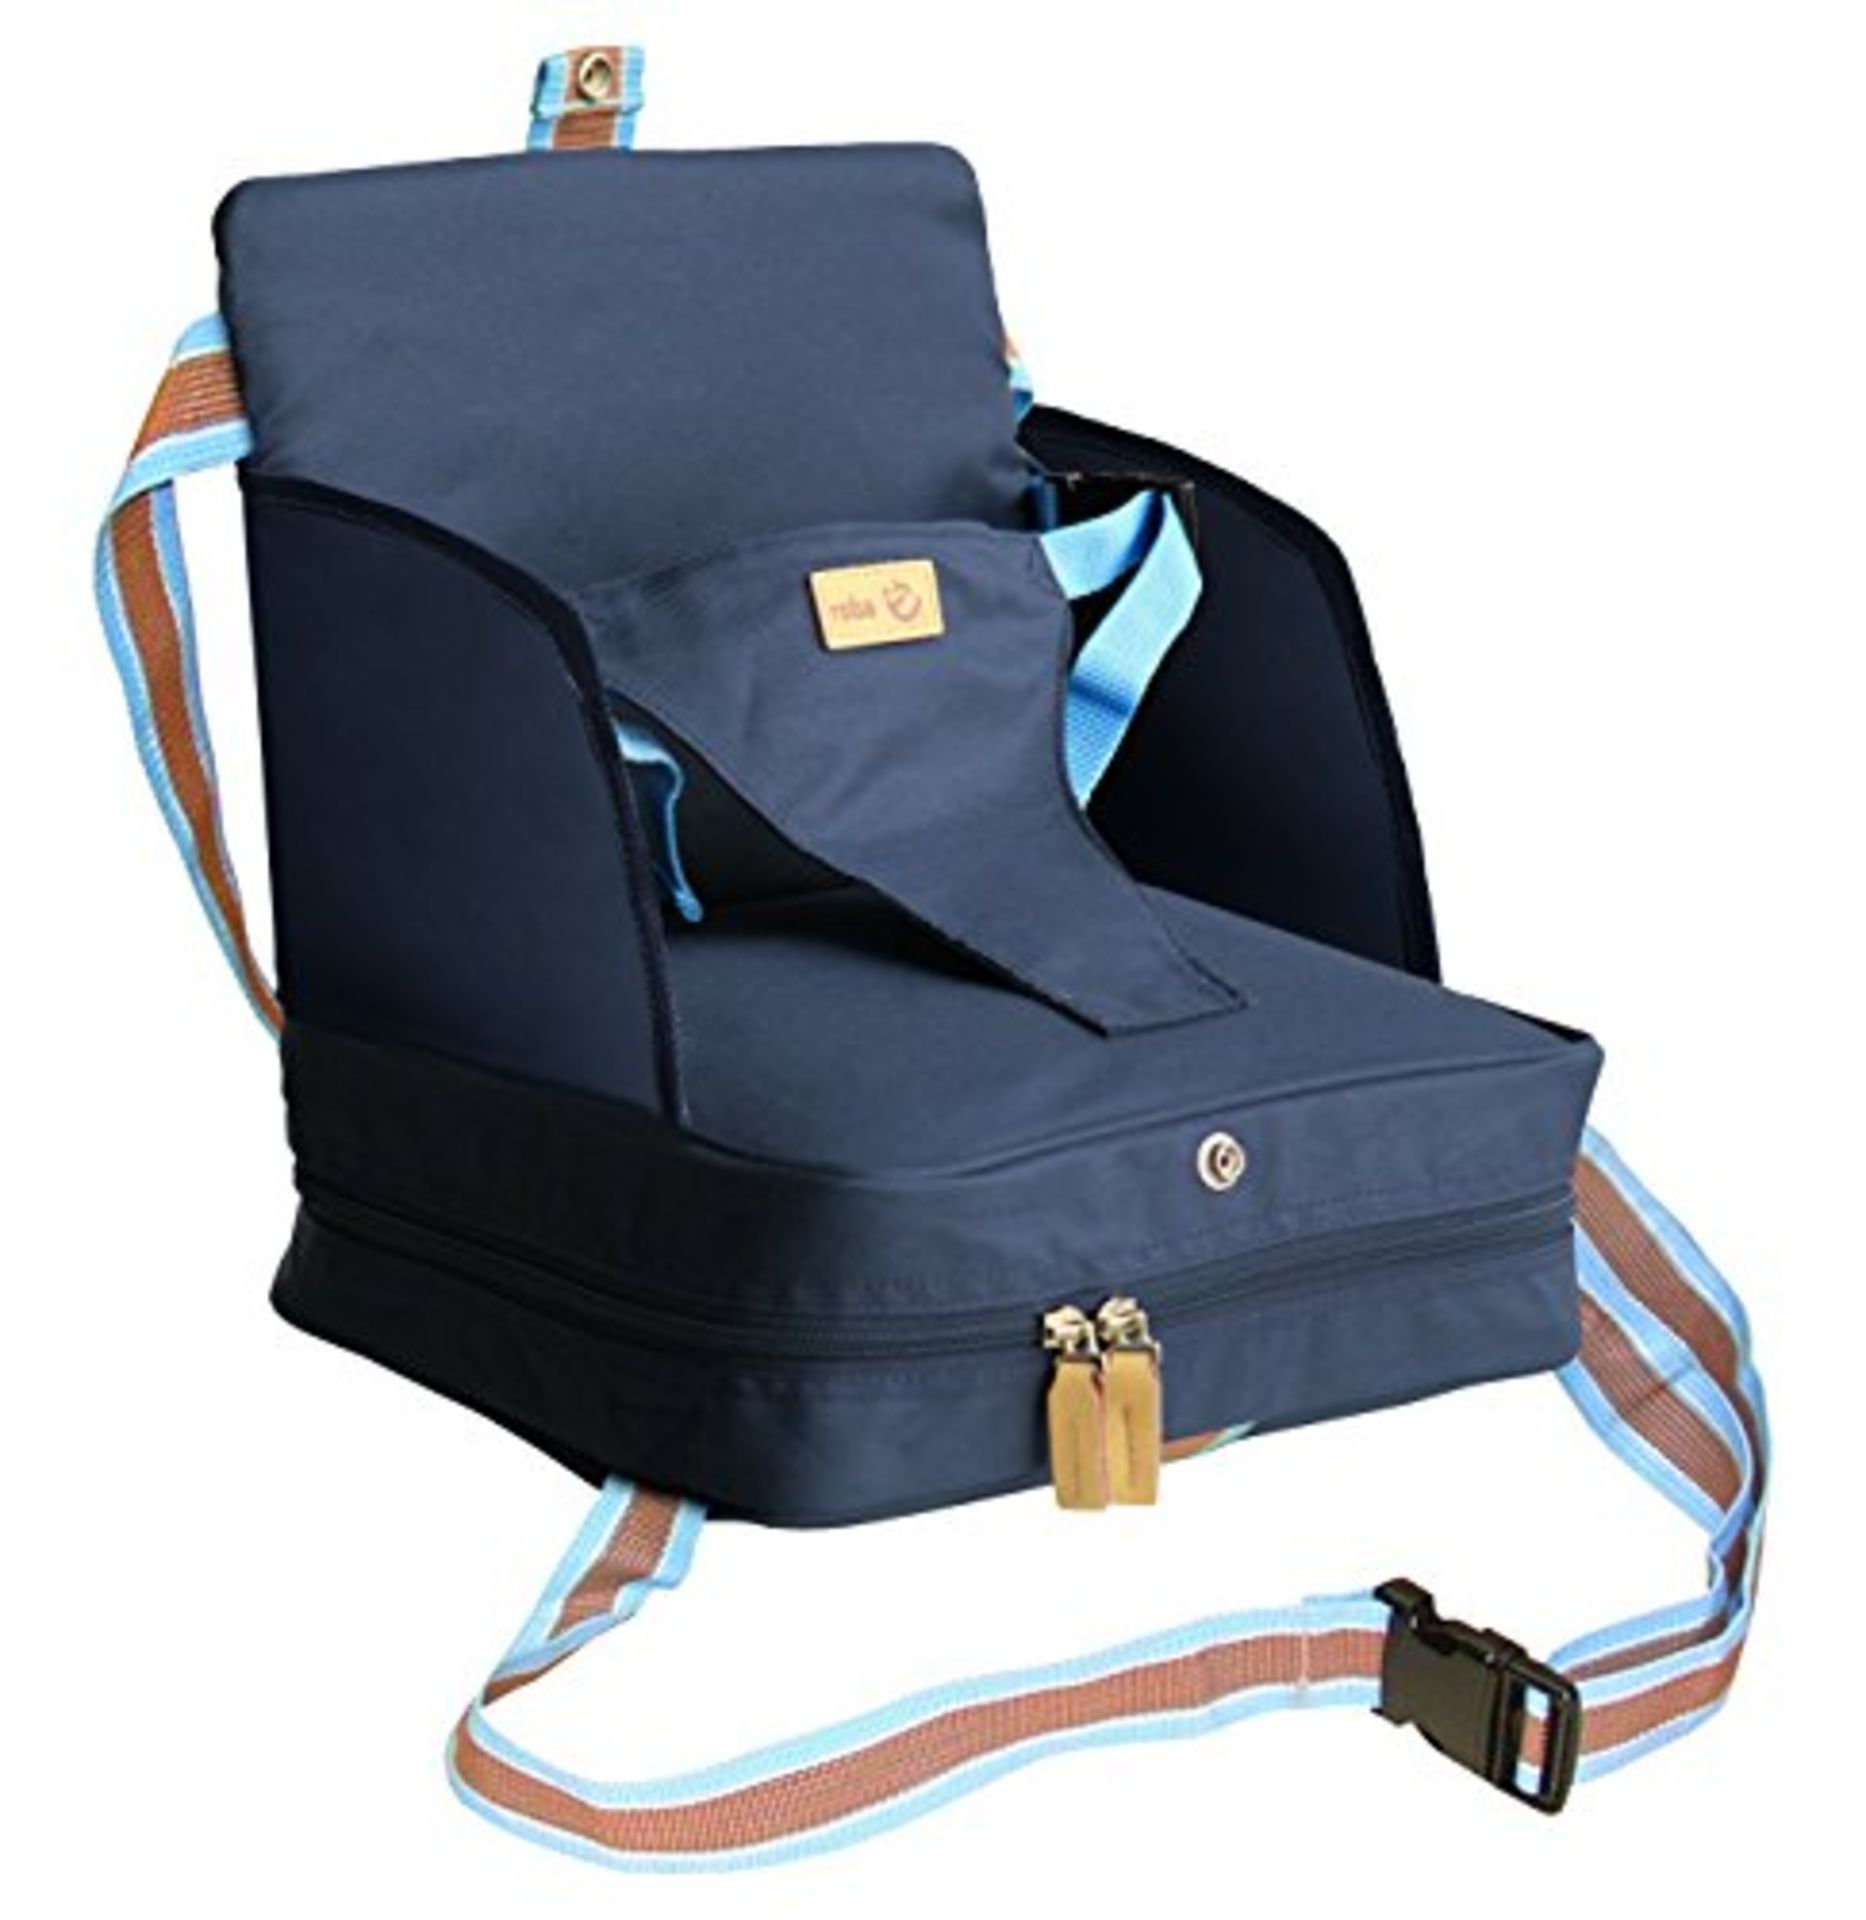 roba Booster Seat - Portable inflatable child seat with raised side panels - Flexible